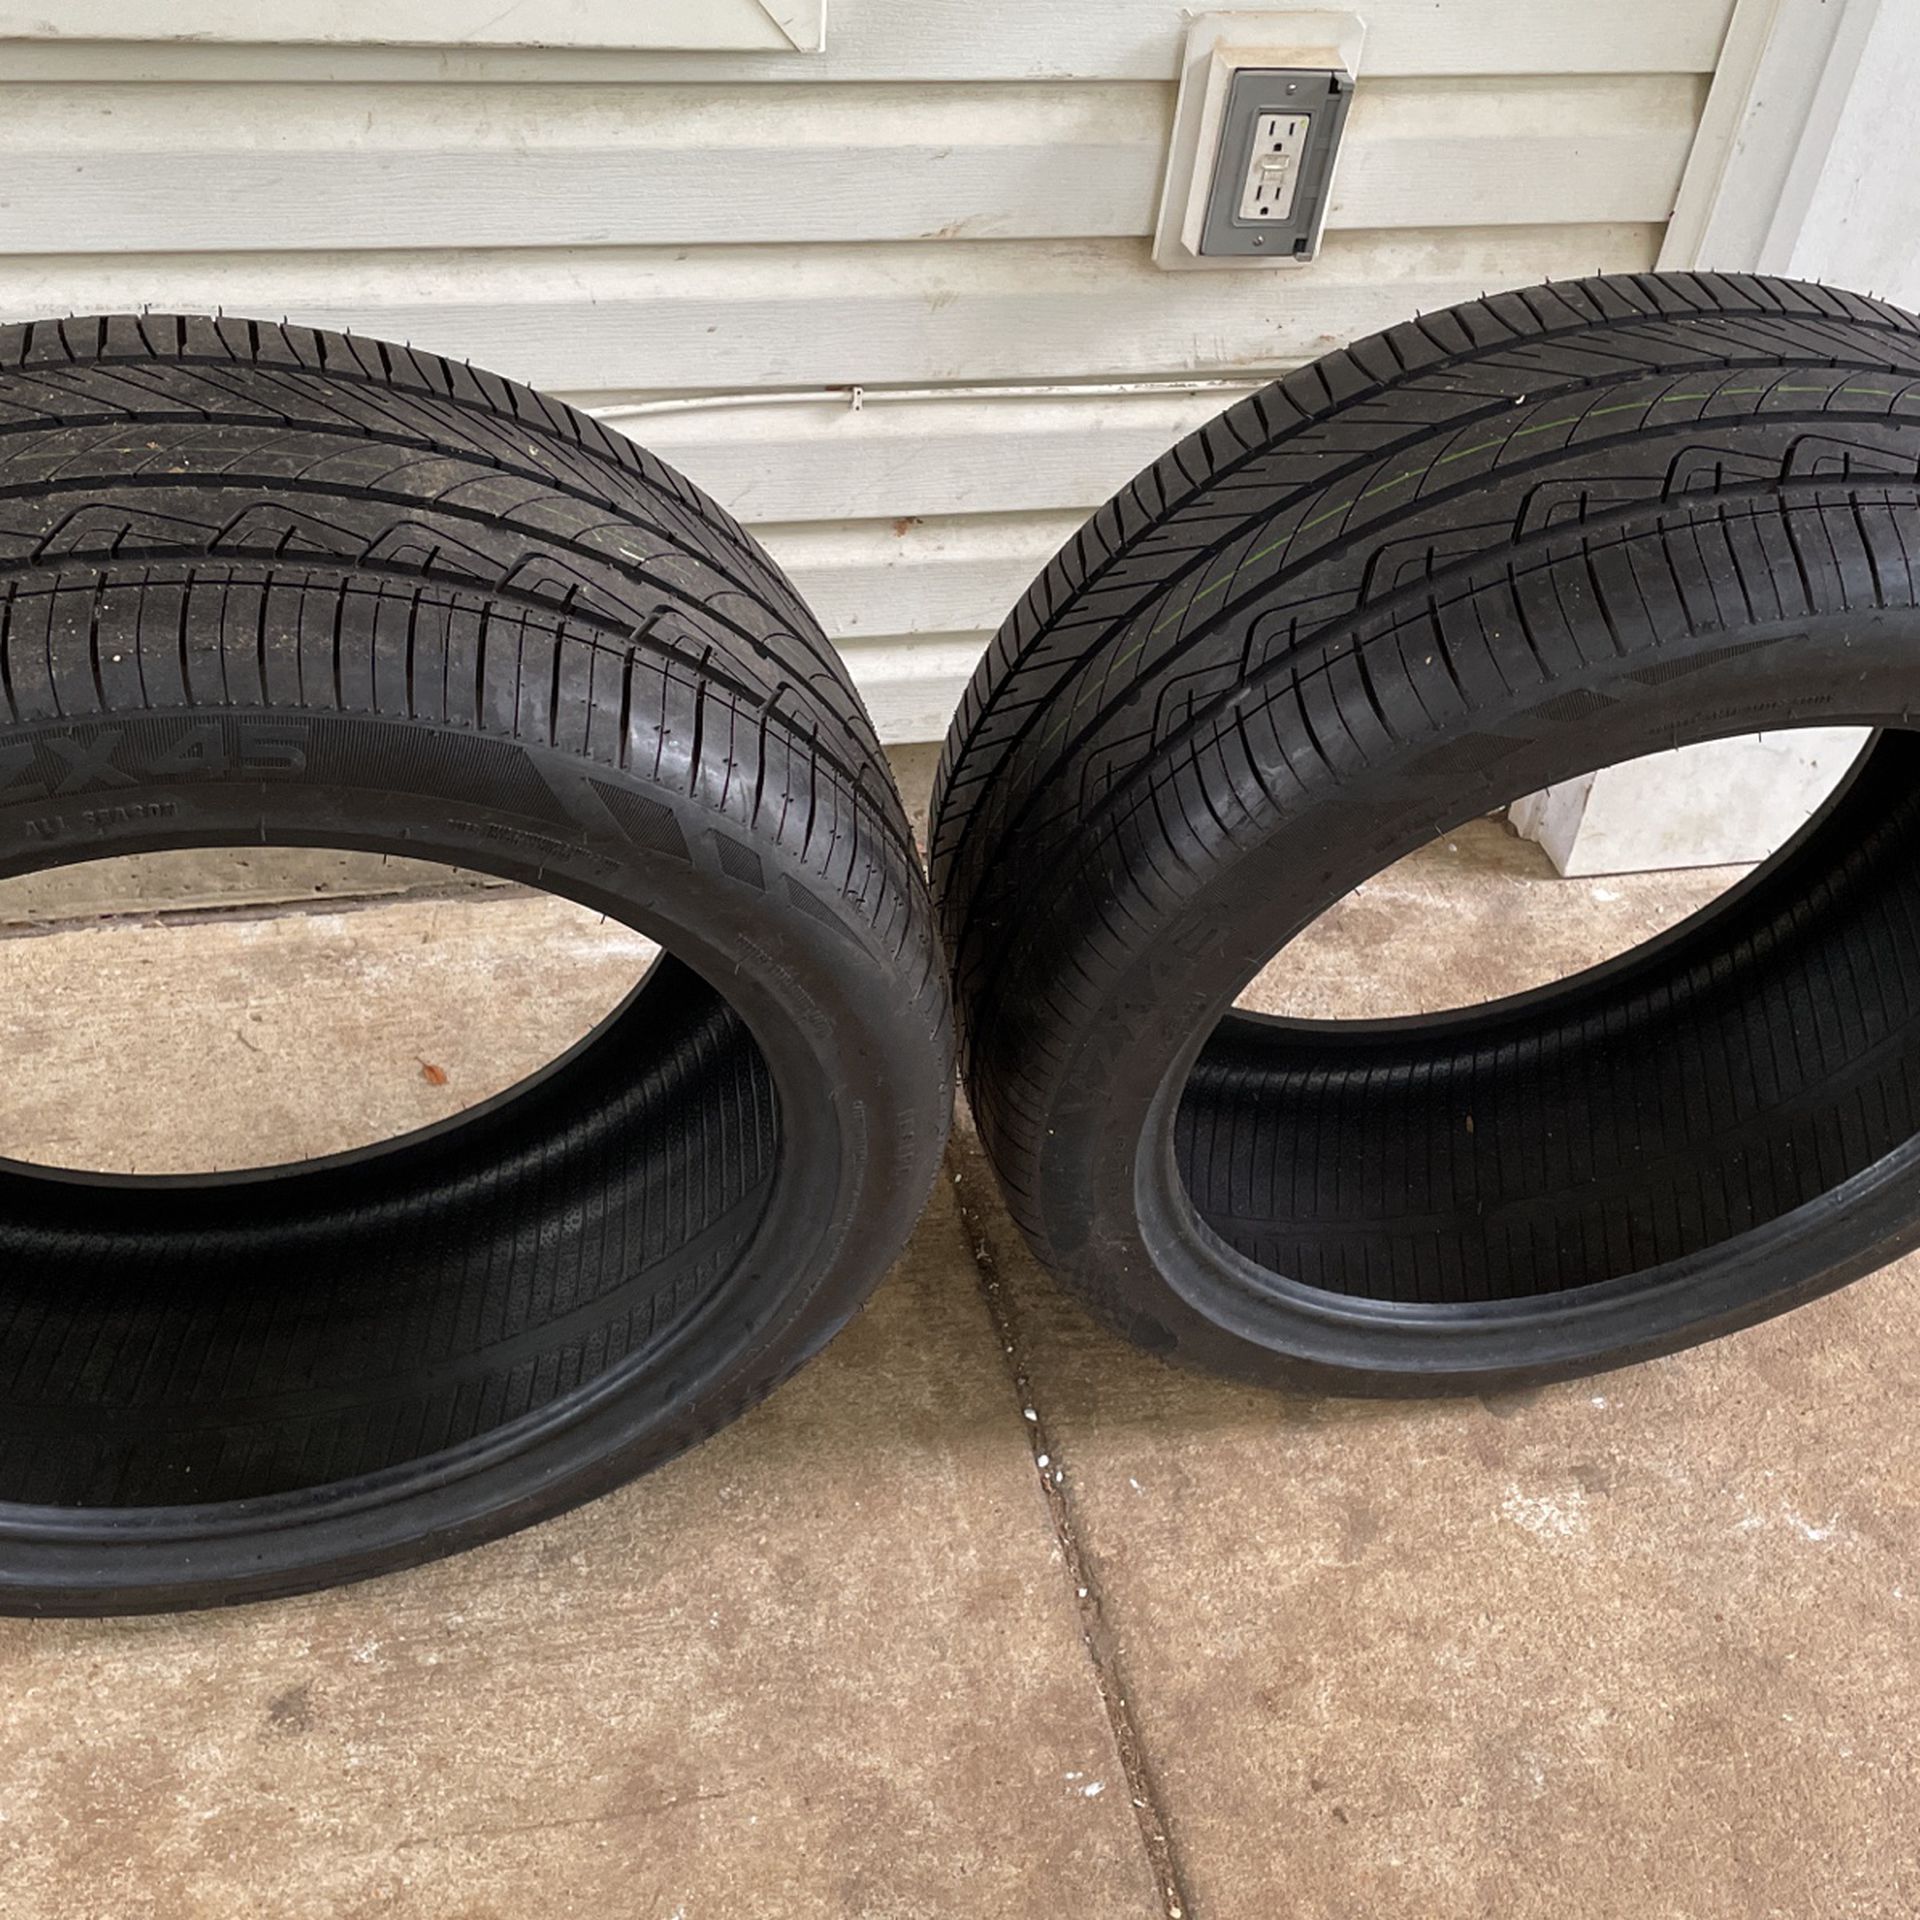 Tires 275/40zr20 Y Speed Rated 